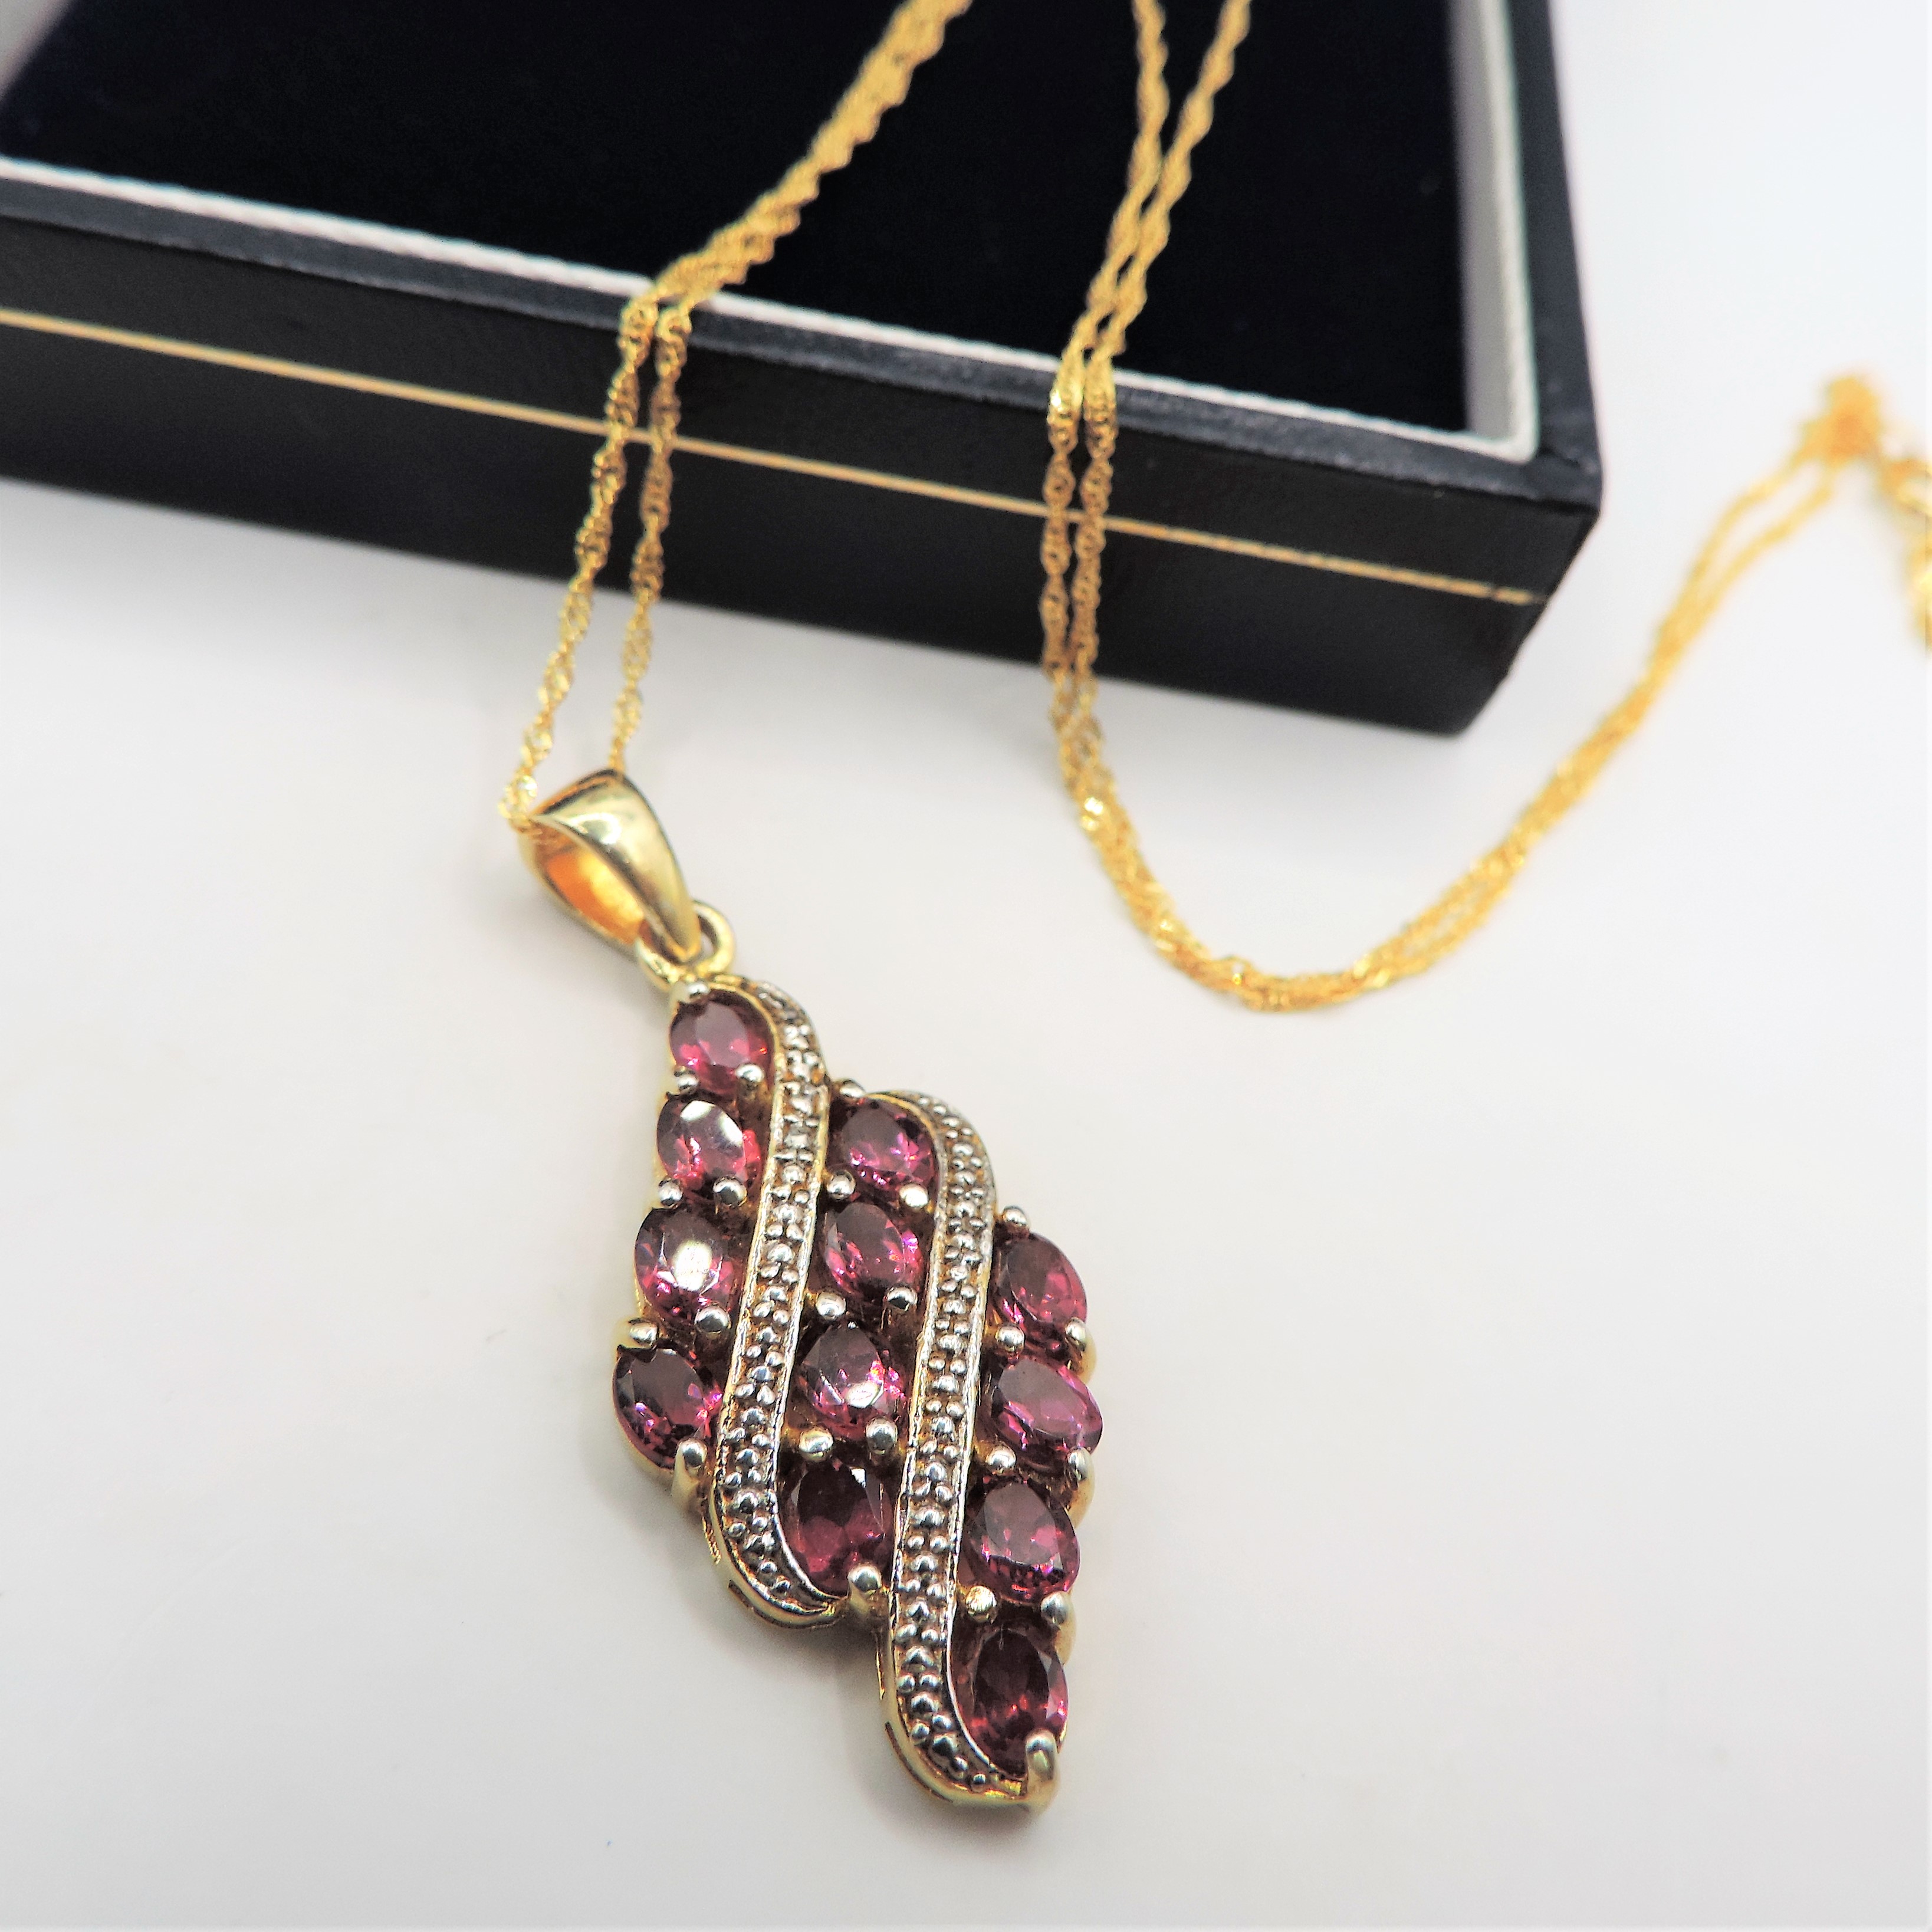 Gold on Sterling Silver Pink Tourmaline Pendant Necklace 'New' with Gift Box - Image 2 of 3